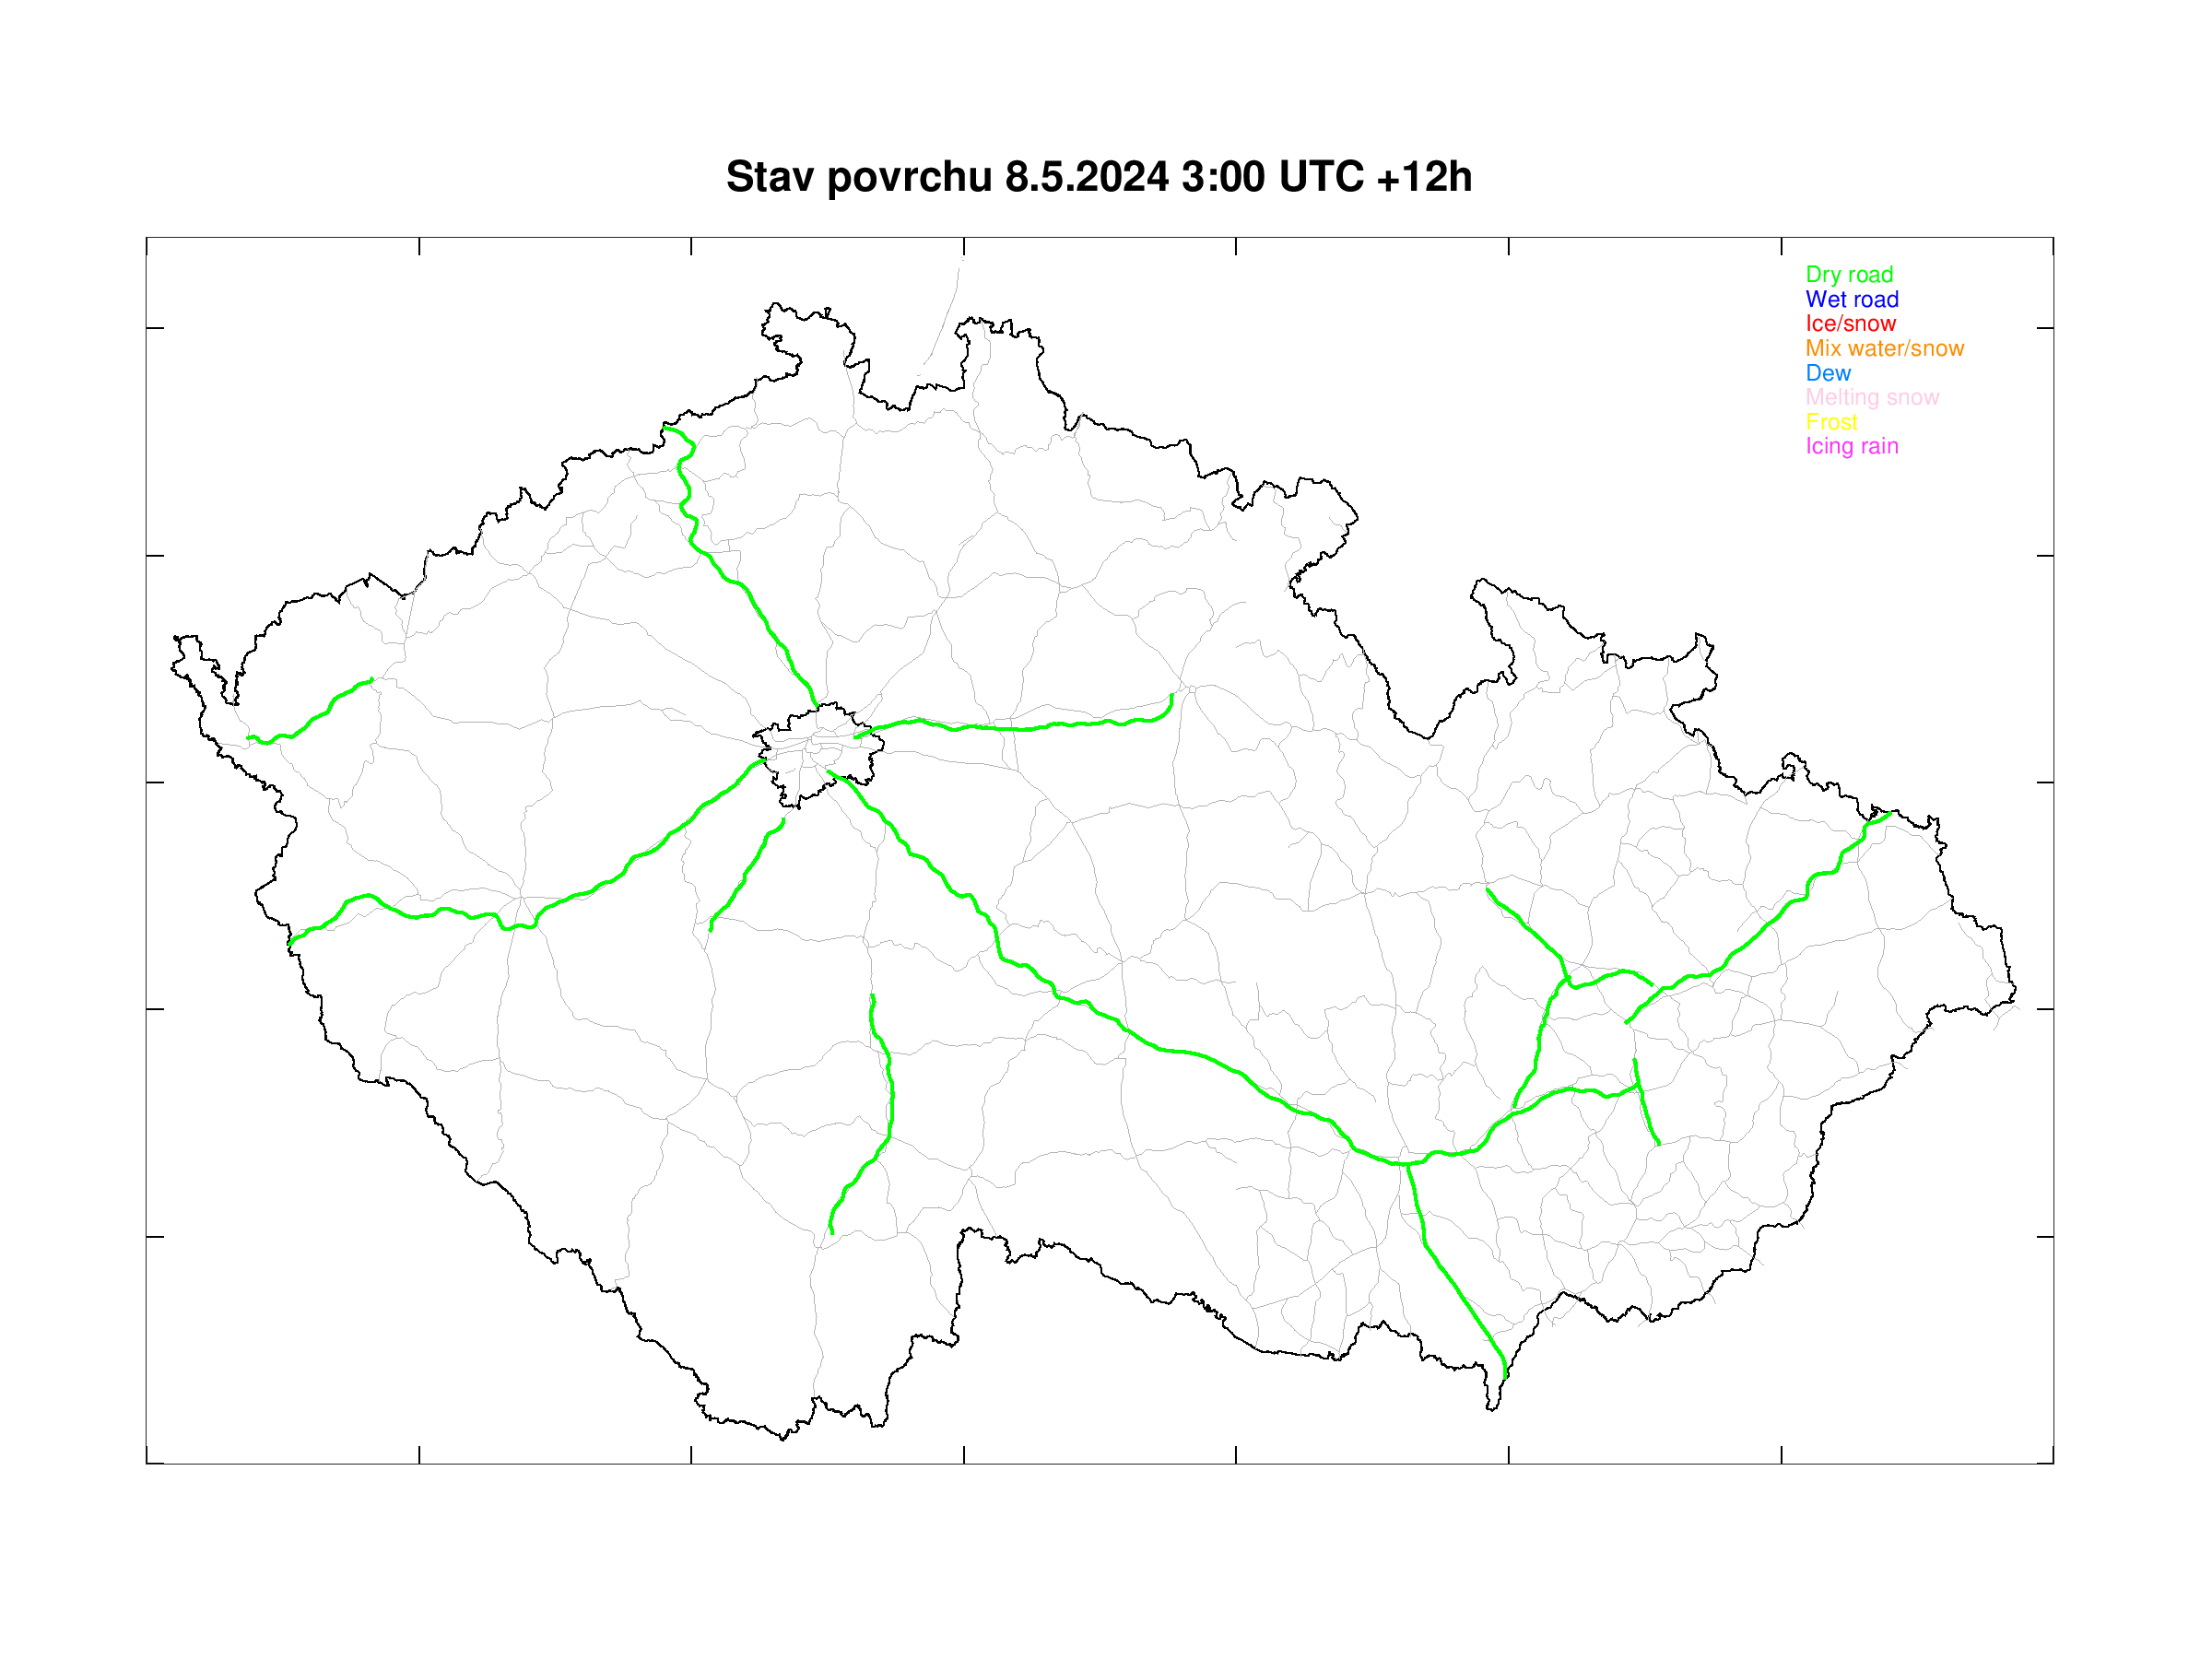 Road surface condition forecast for Czech highways +12h